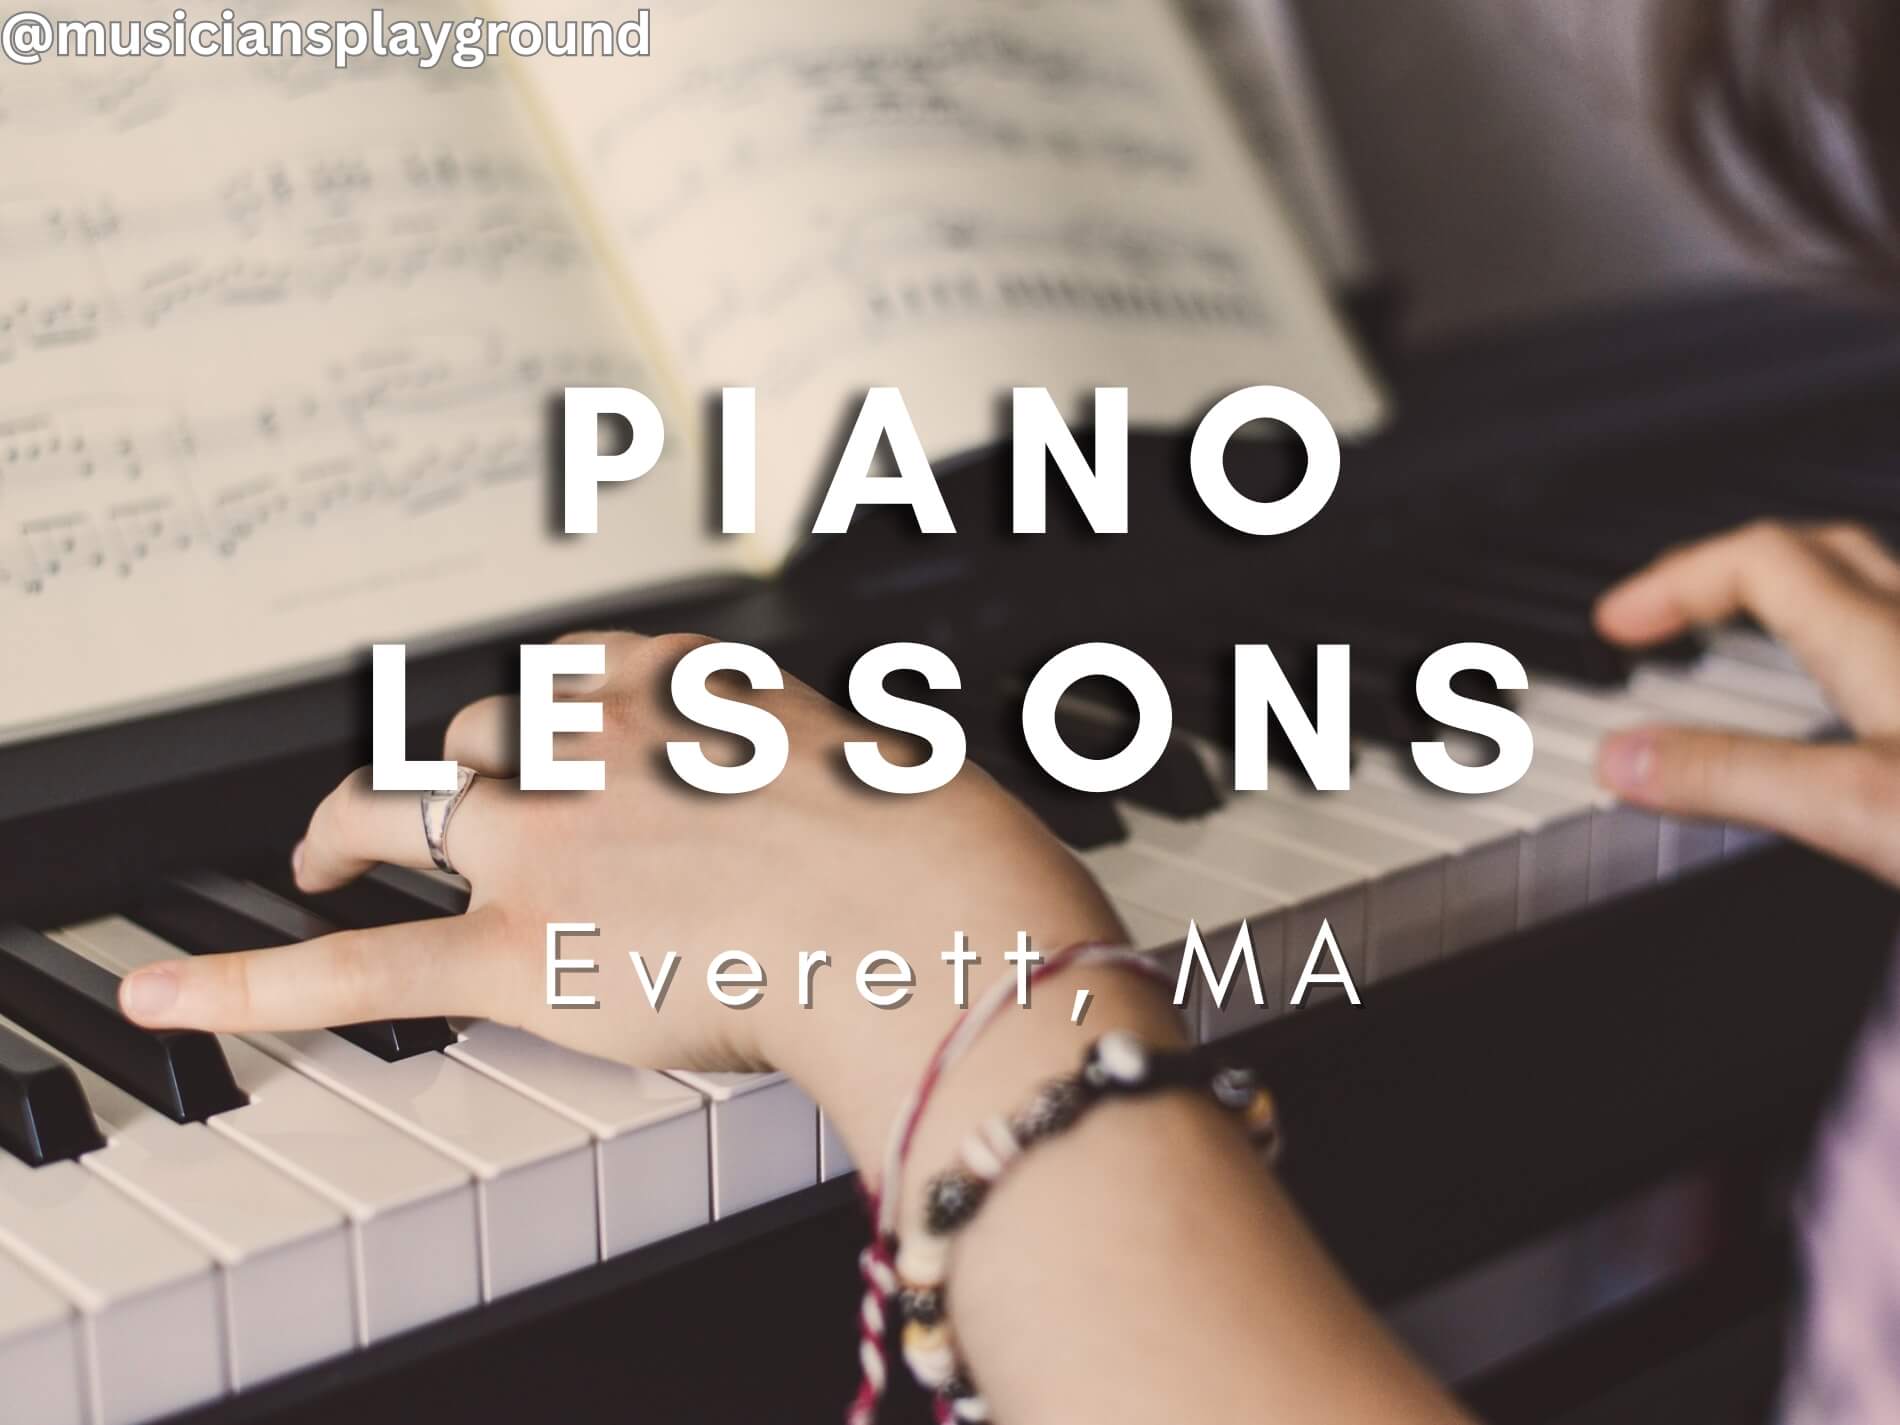 Everett, Massachusetts: The Perfect City for Piano Lessons